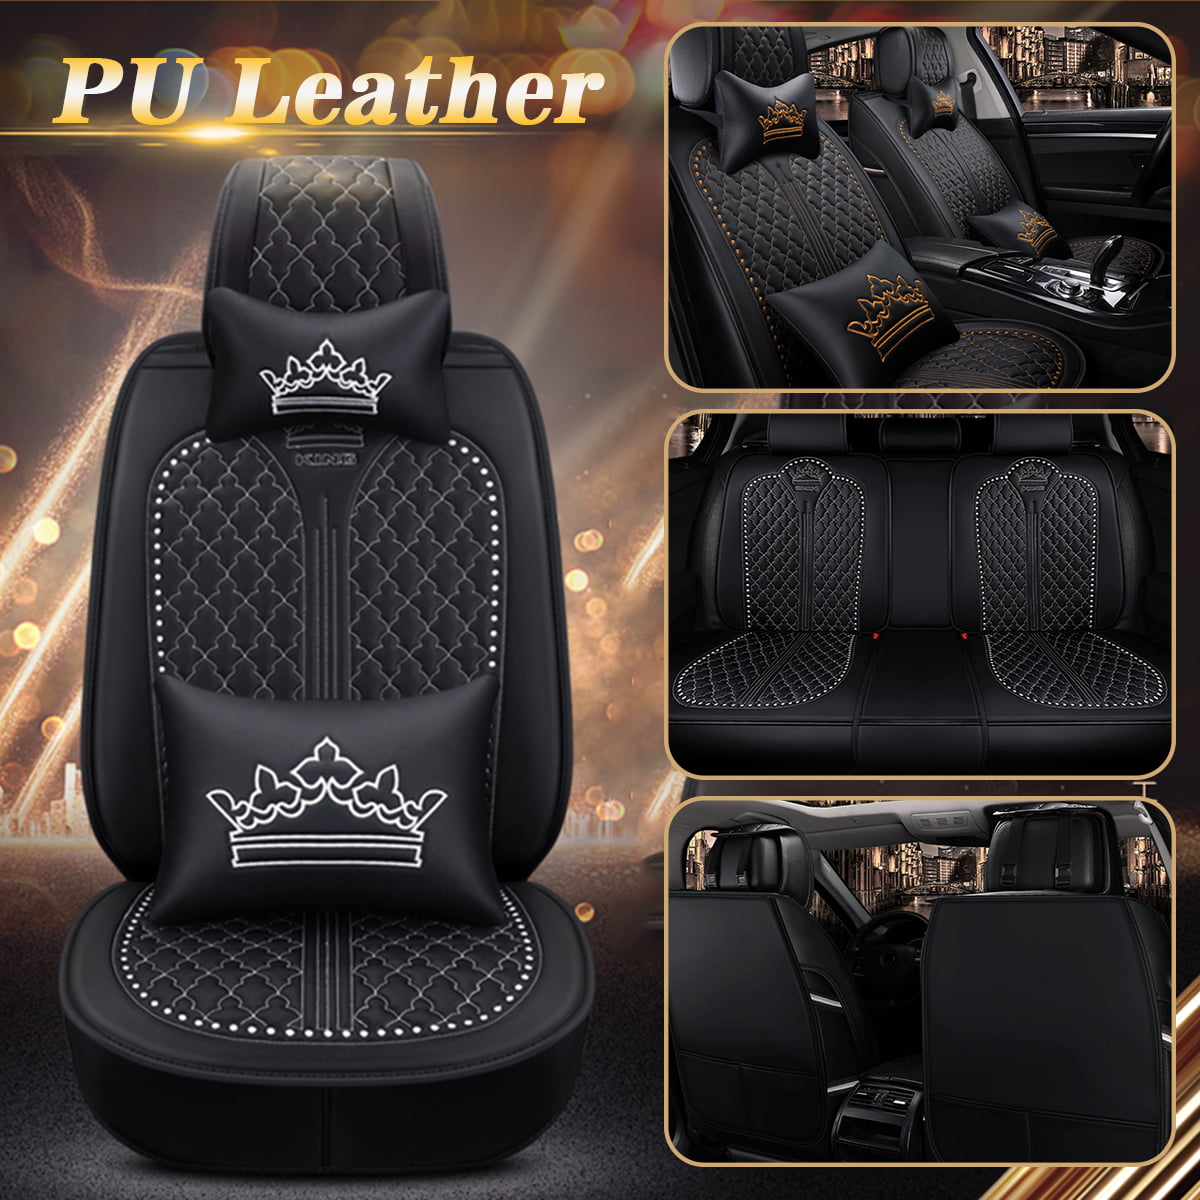 CARMAE Car Seat Covers Full Set Premium Faux Leather Automotive Front and Back Seat Protectors Leather Look Car Seat Covers Car Accessories